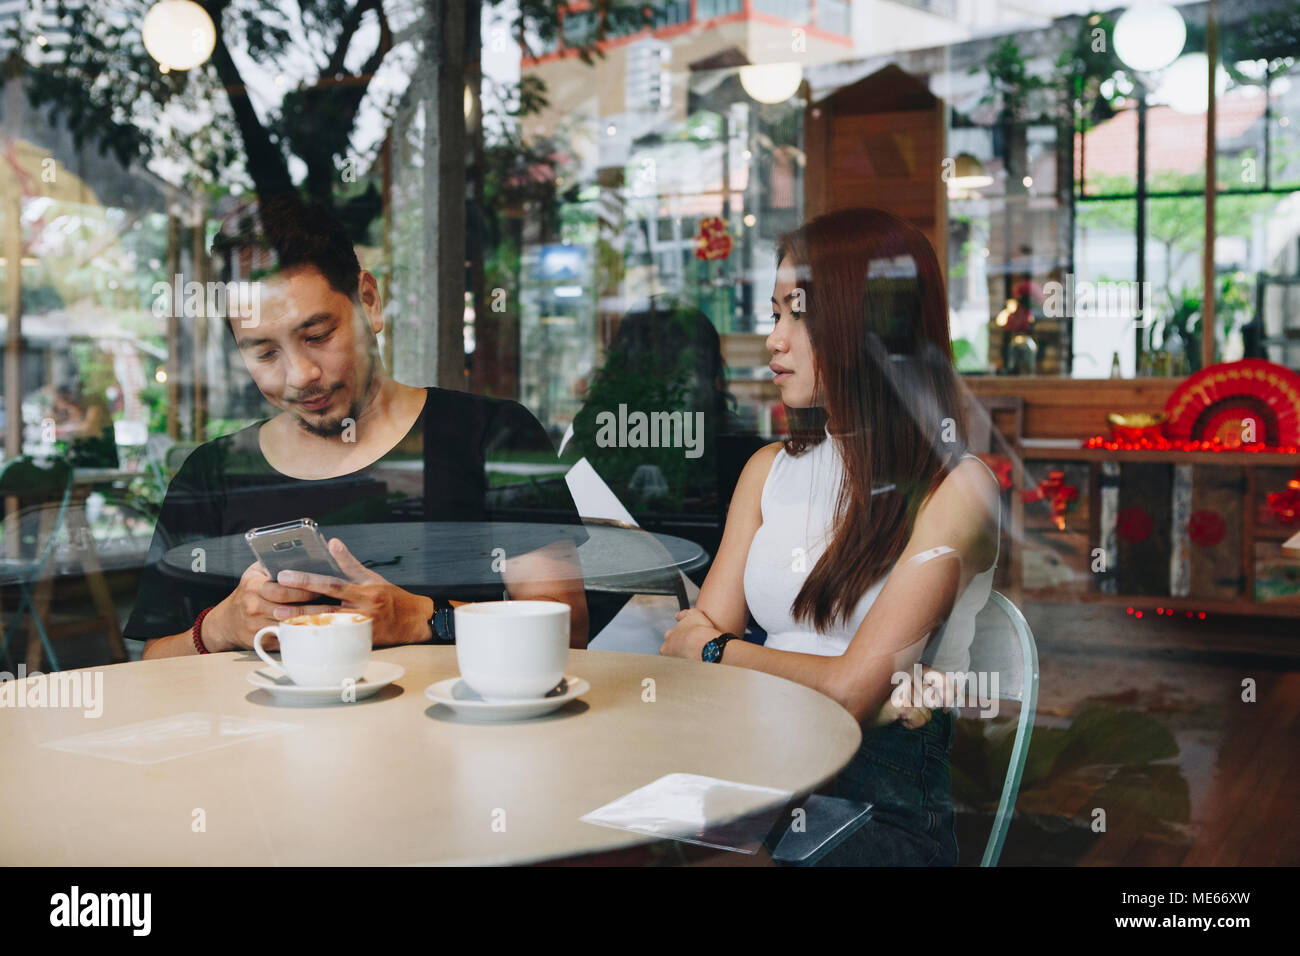 Couple using a phone at a cafe Stock Photo